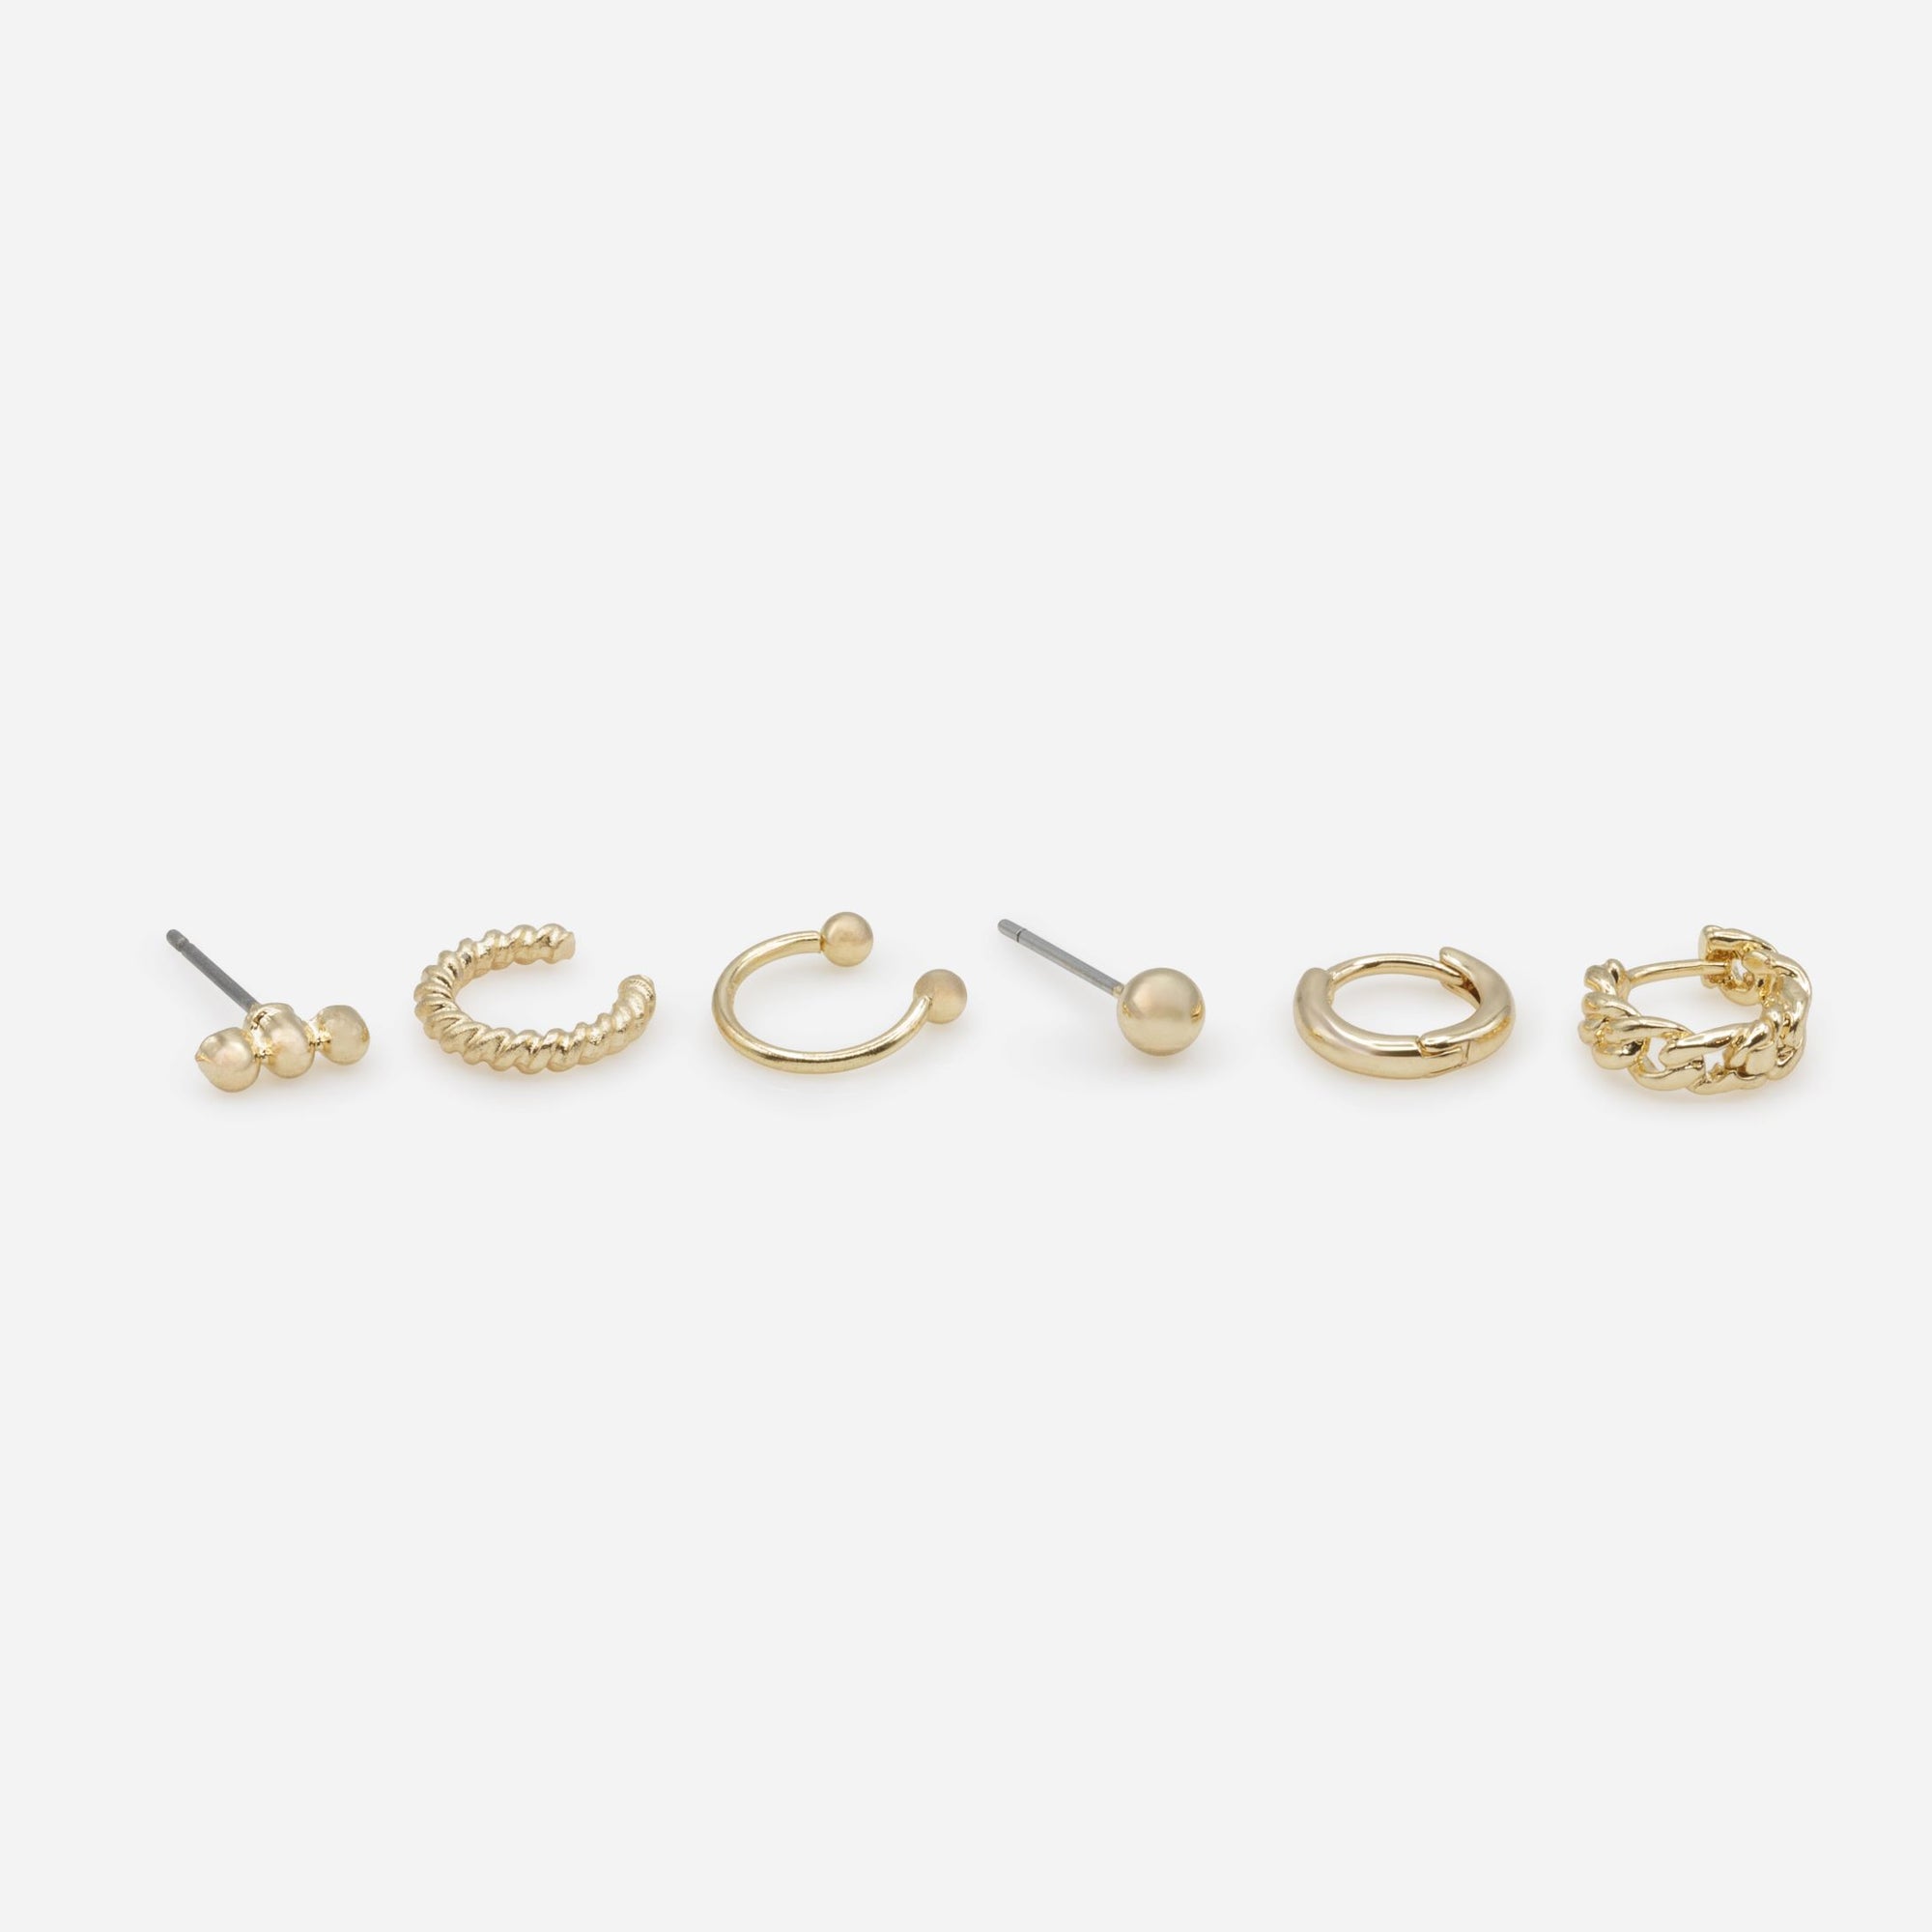 Set of four earrings and two gold cuffs